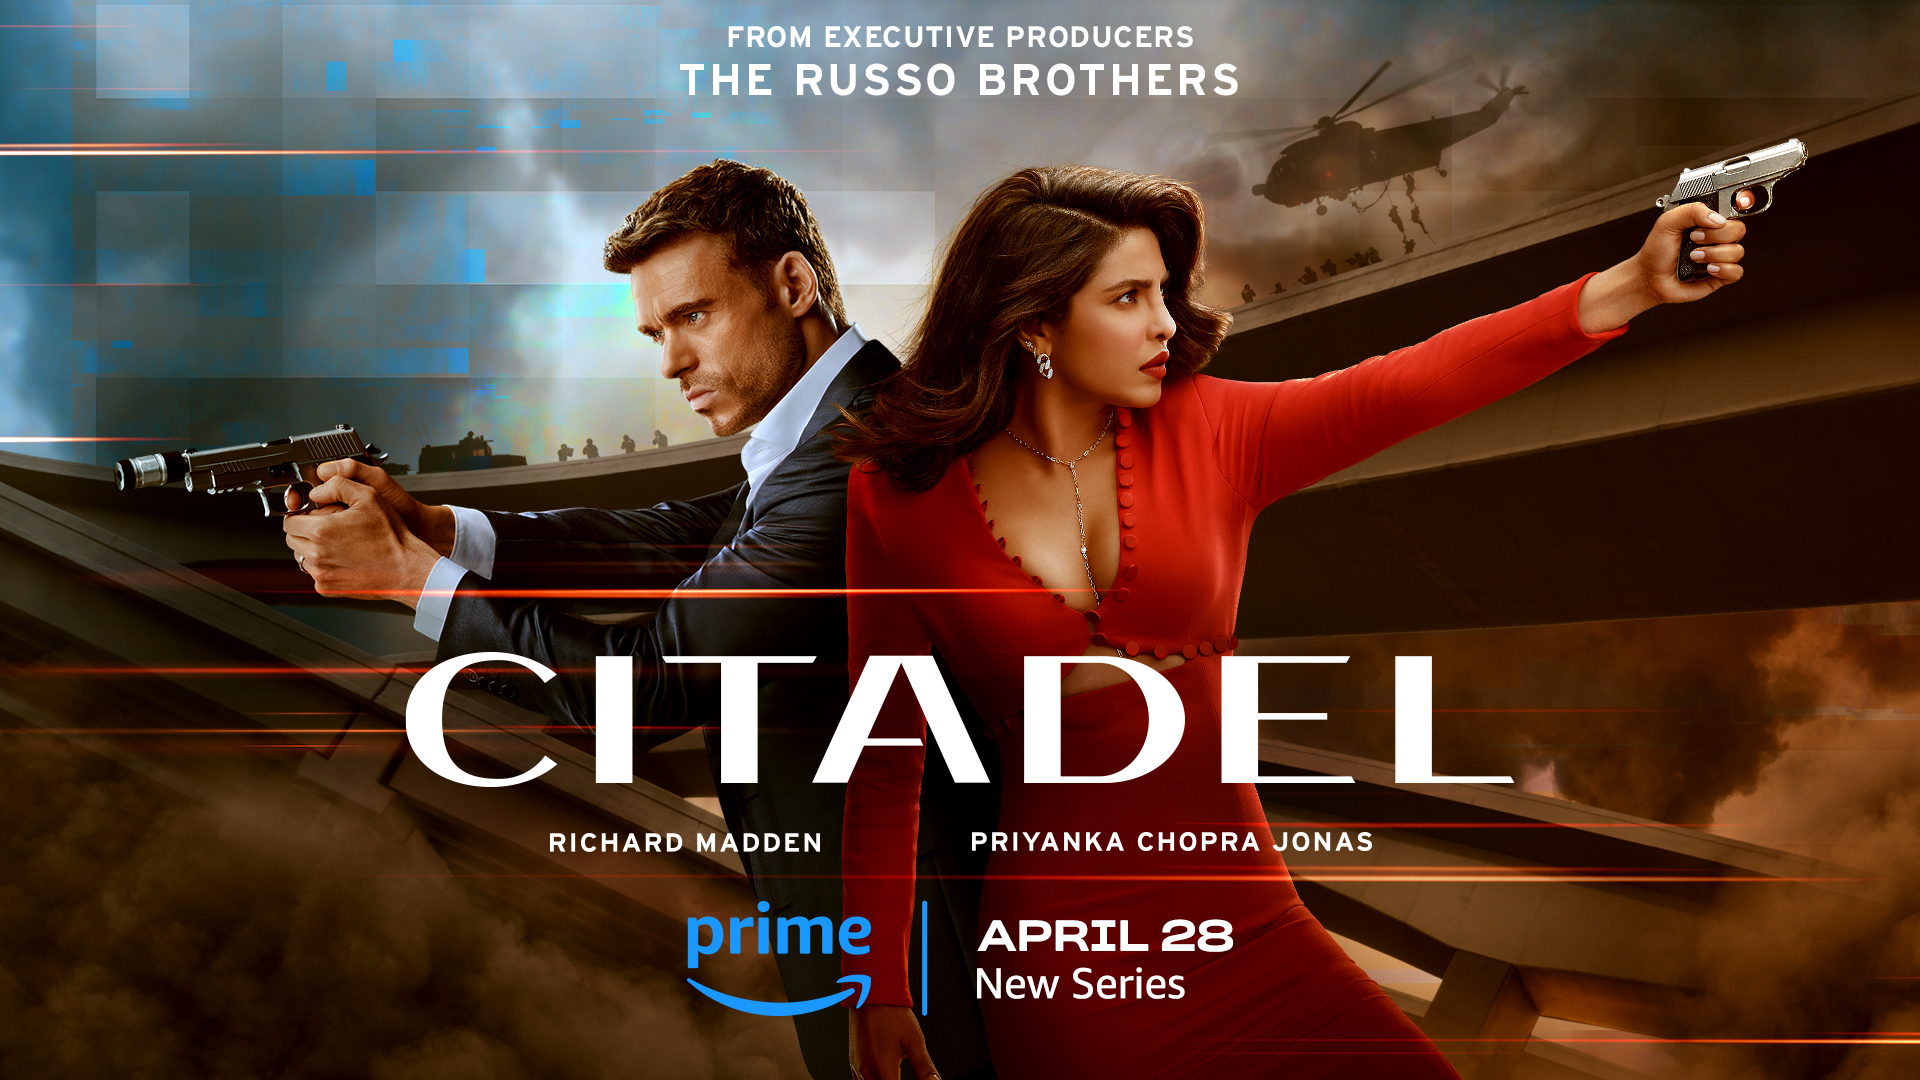 Citadel release date, cast, plot, trailer, interviews, more What to